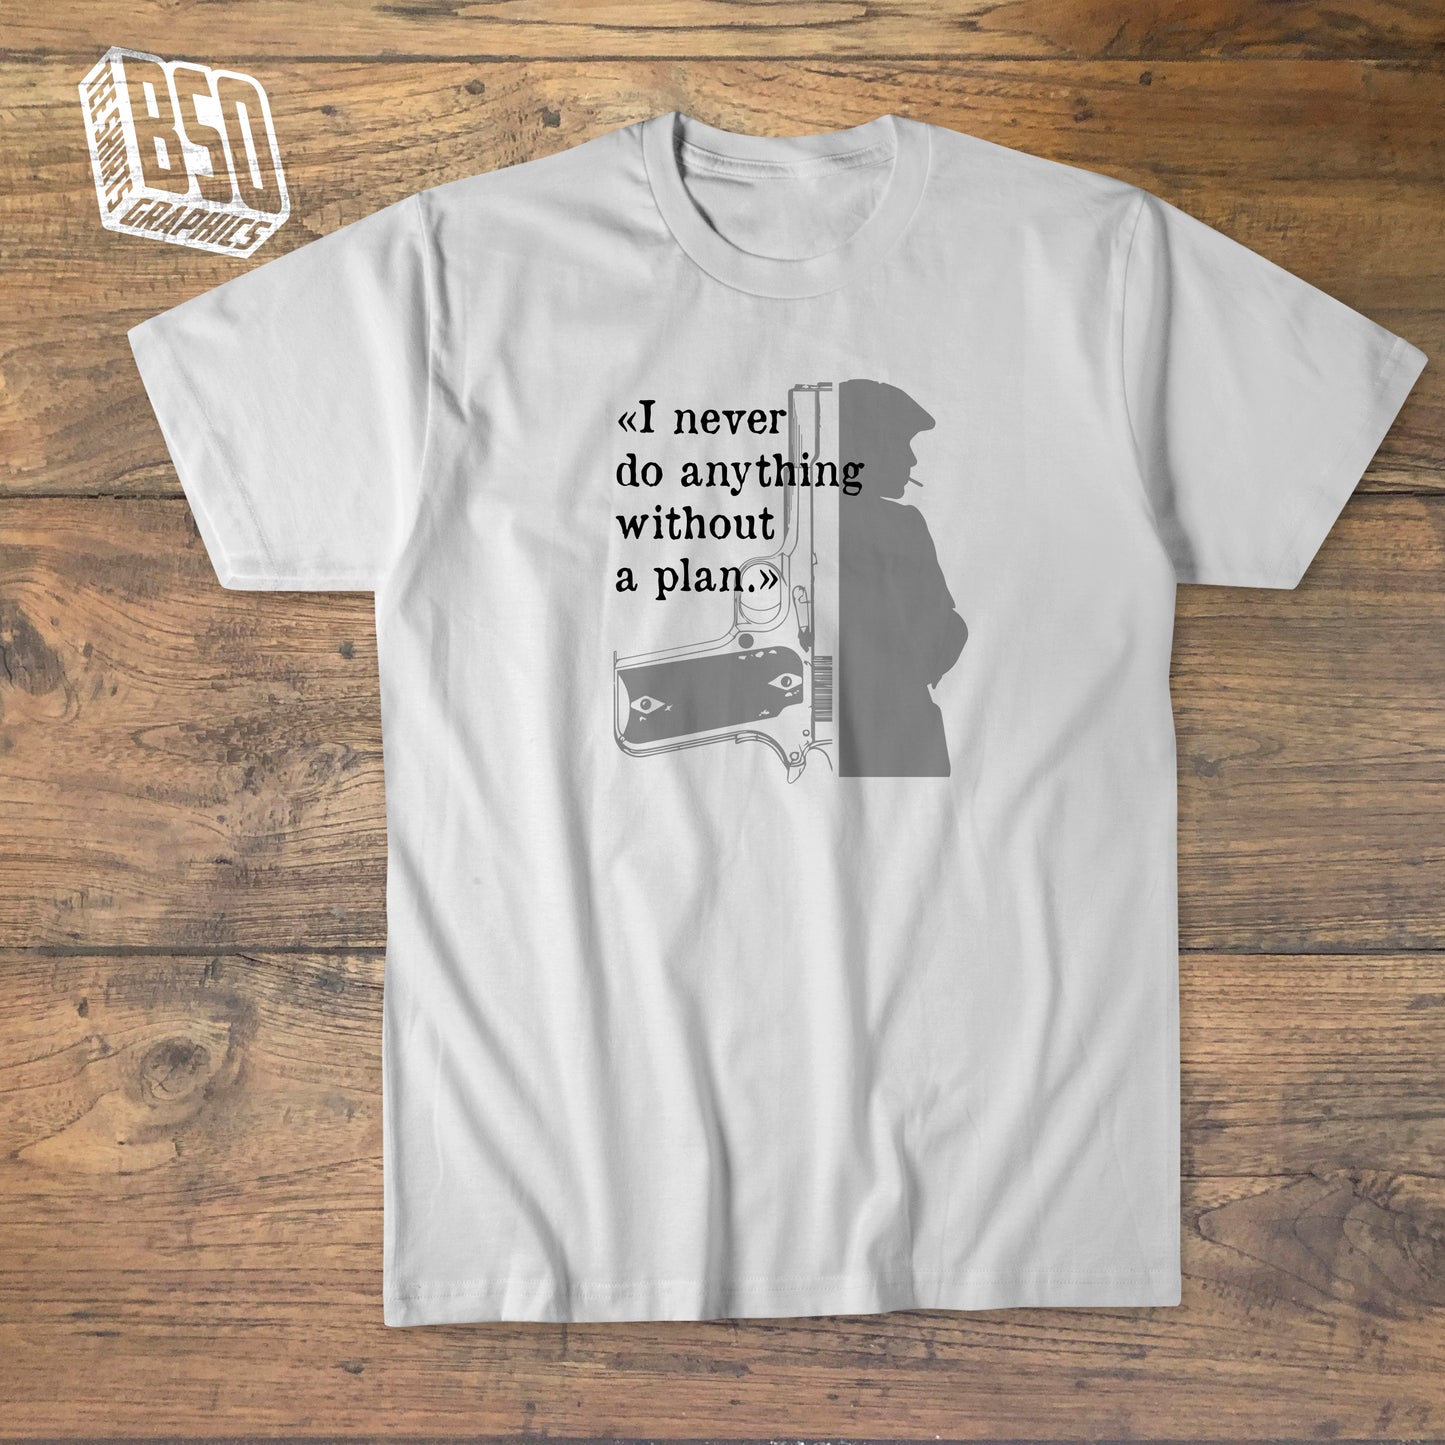 Tee-shirt "Peaky Blinders - I never do anything without a plan"